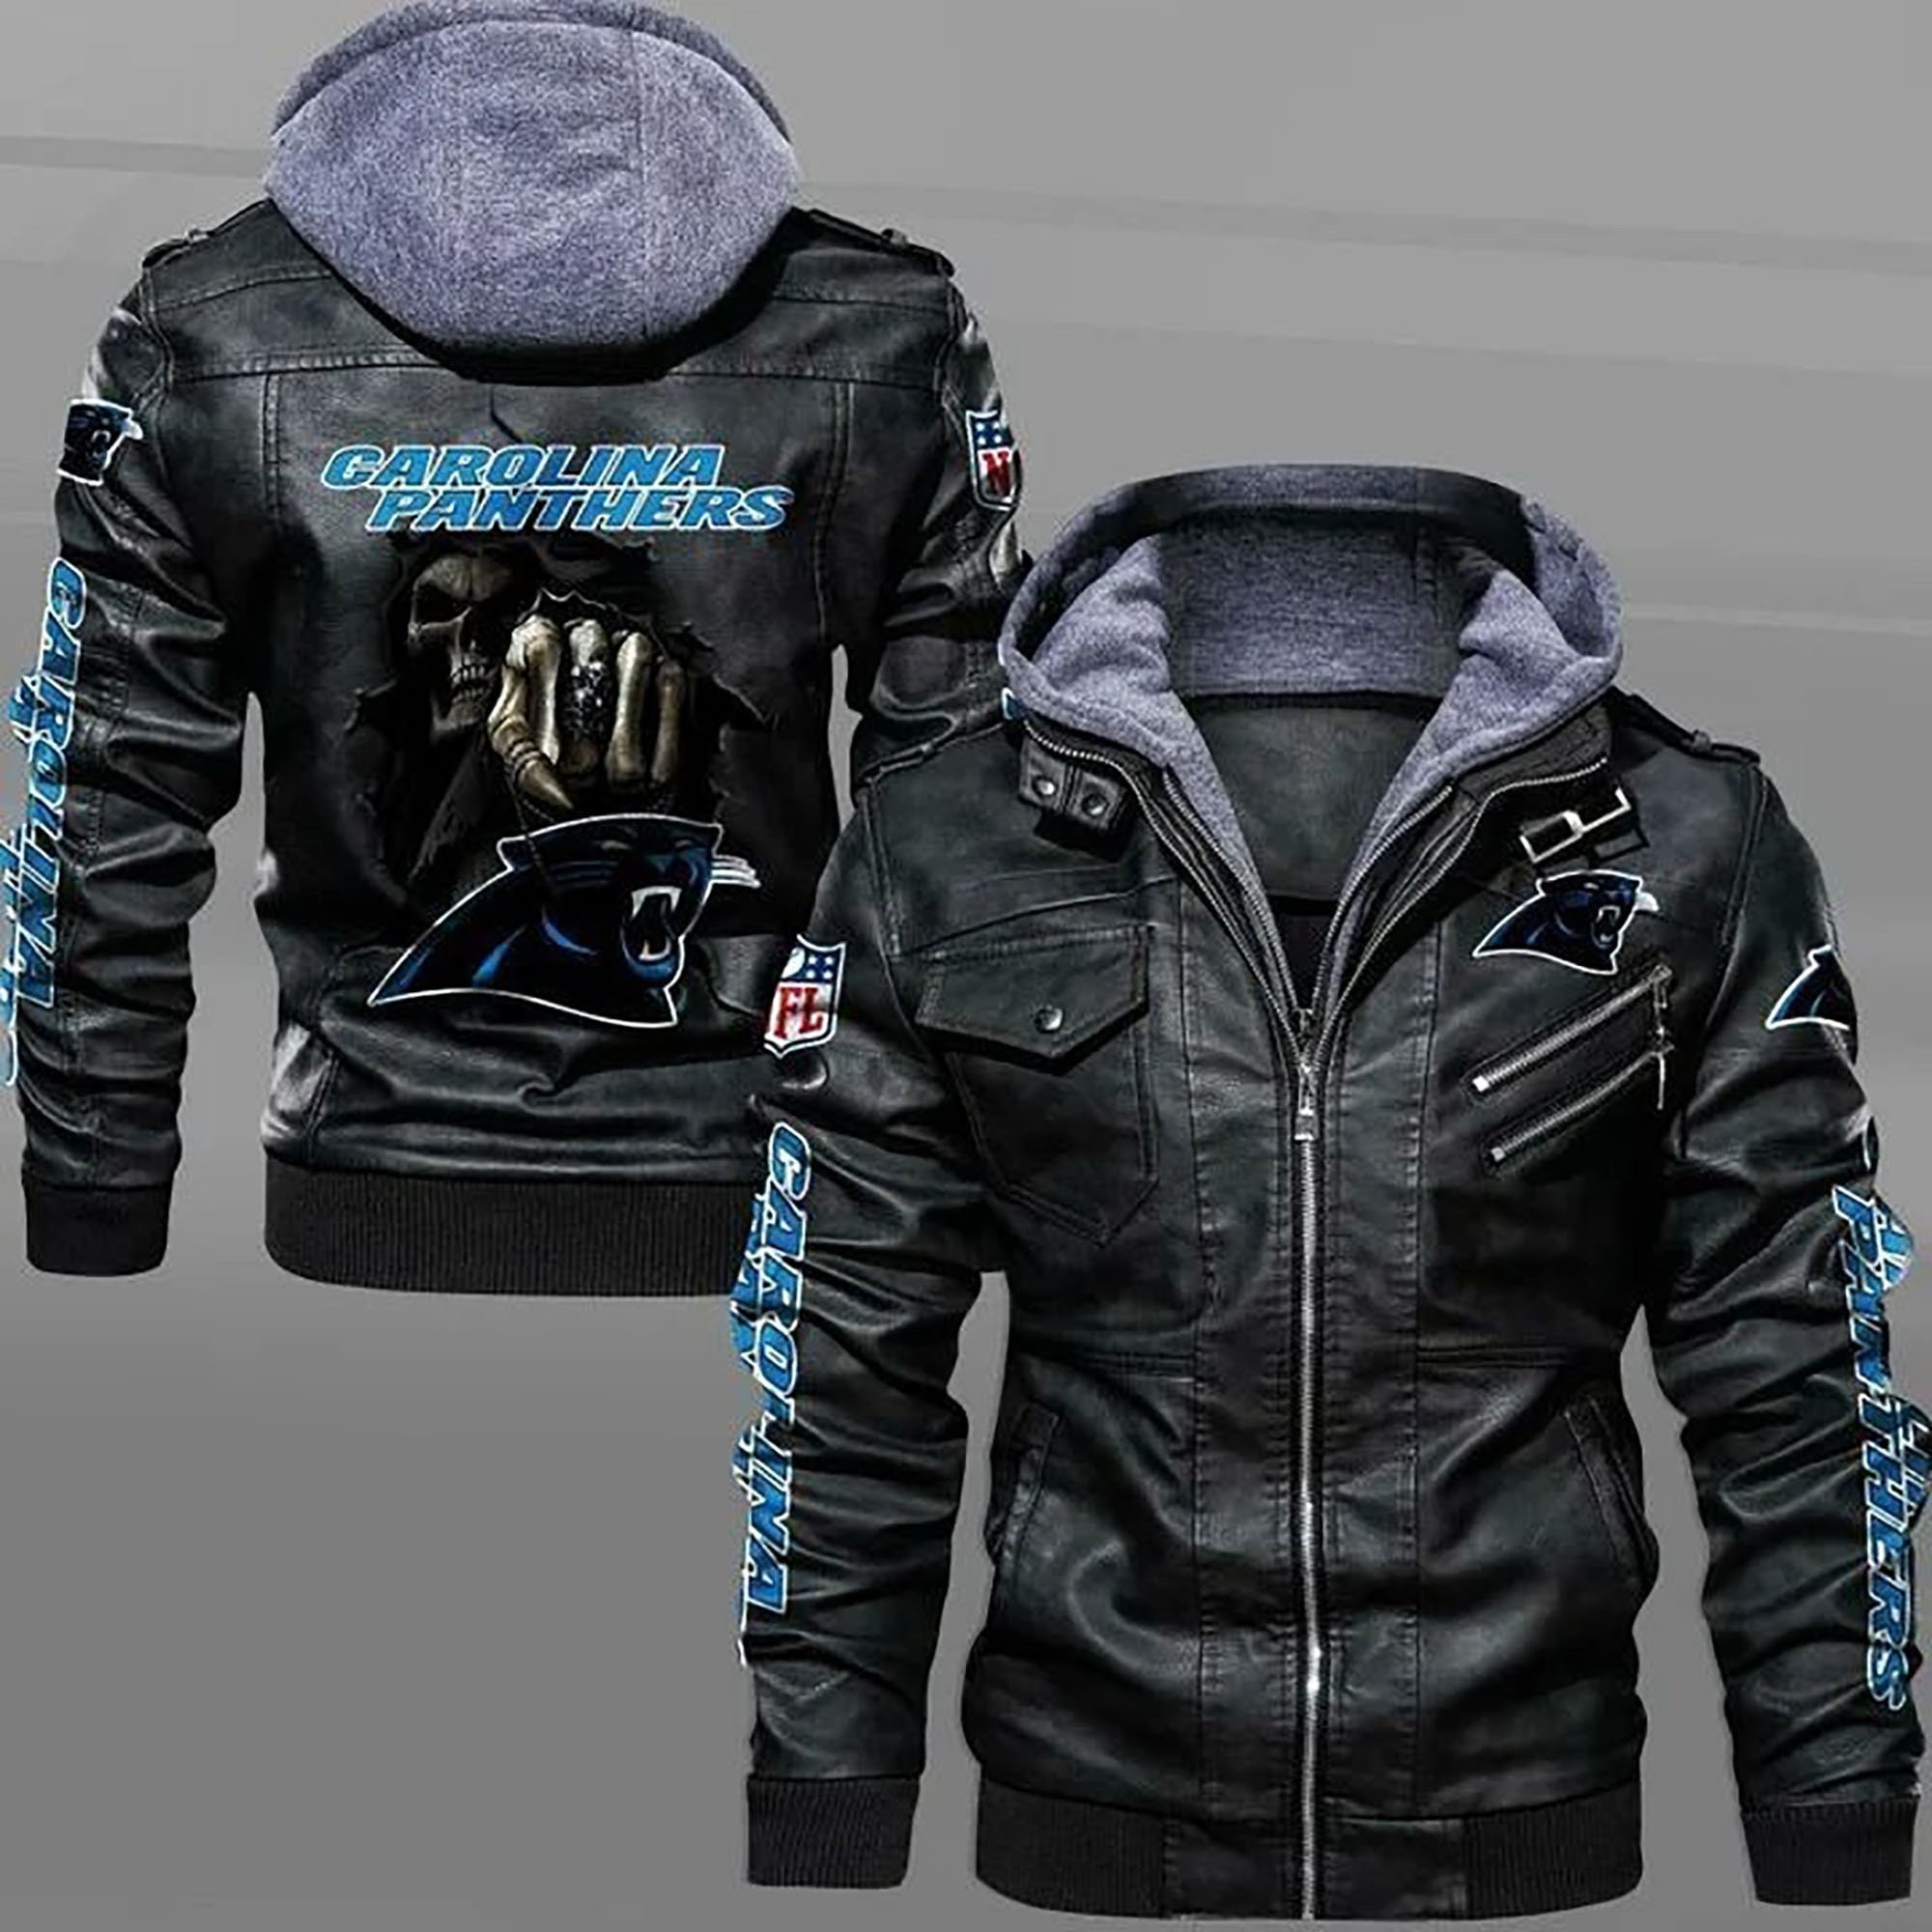 These Amazing Leather Jacket will add to the appeal of your outfit 155